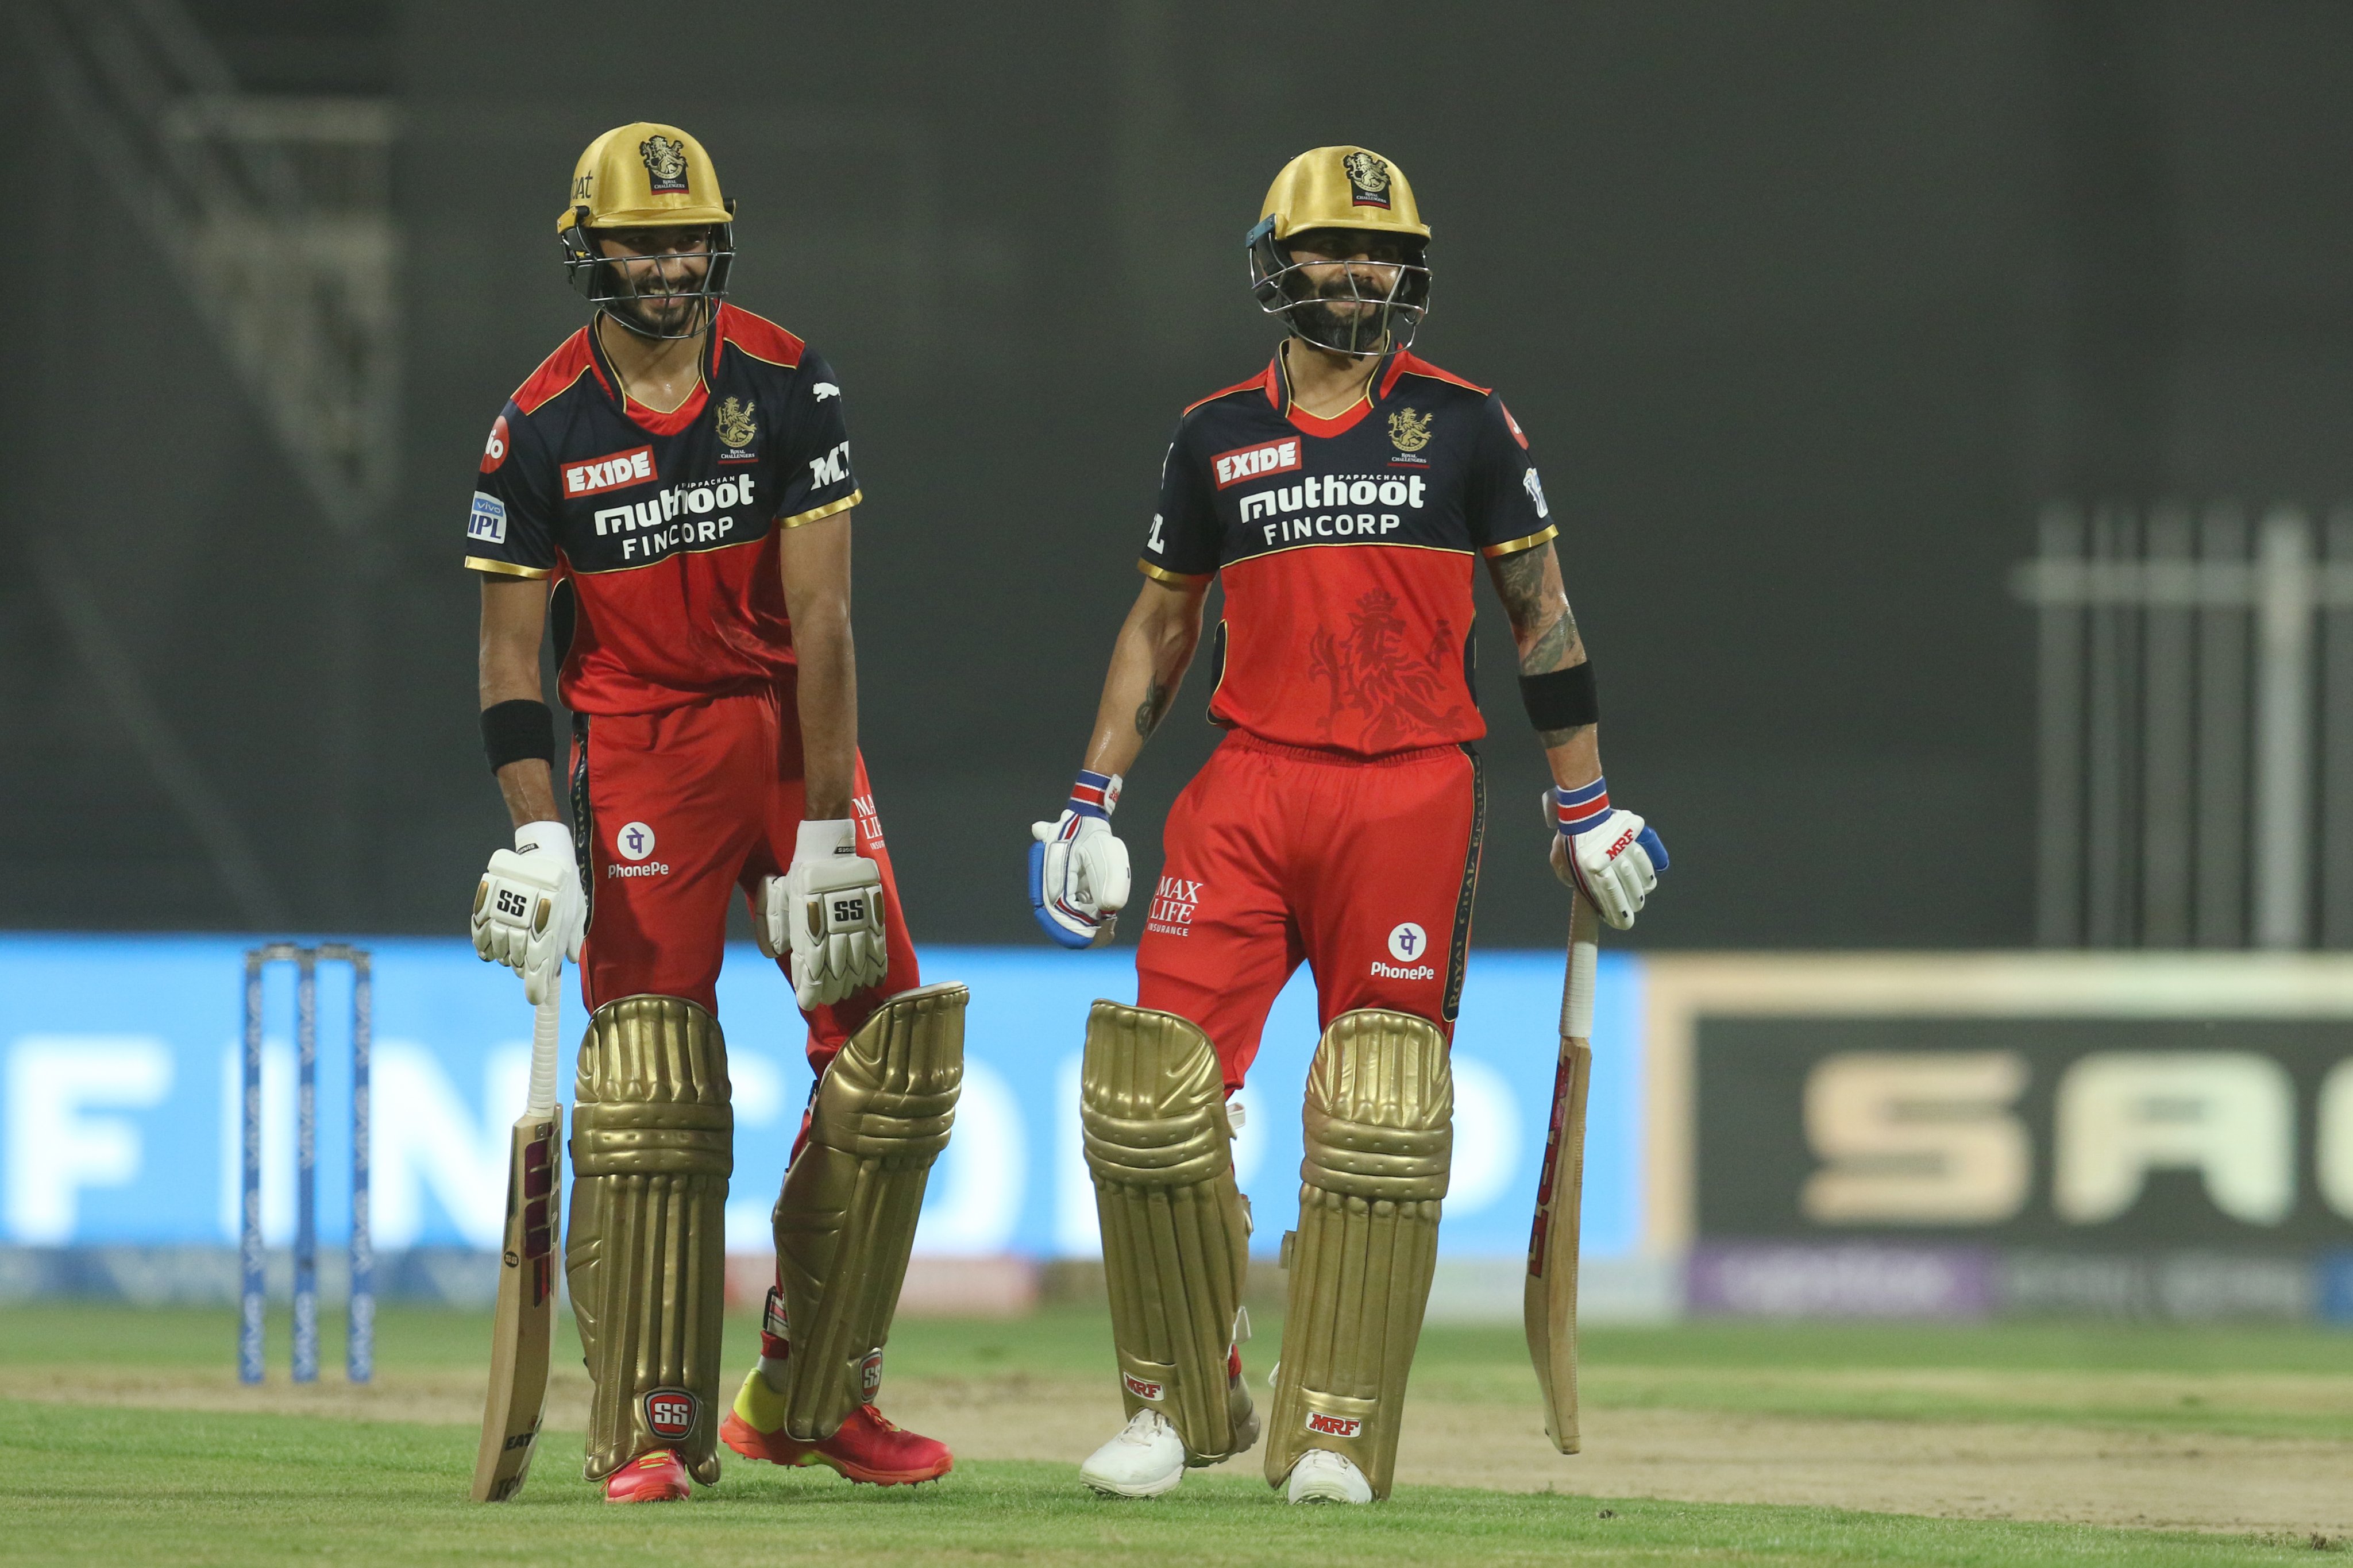 CSK vs RCB | Twitter reacts as RCB collapse to score 38 runs and lose 5 wickets in last 30 balls 